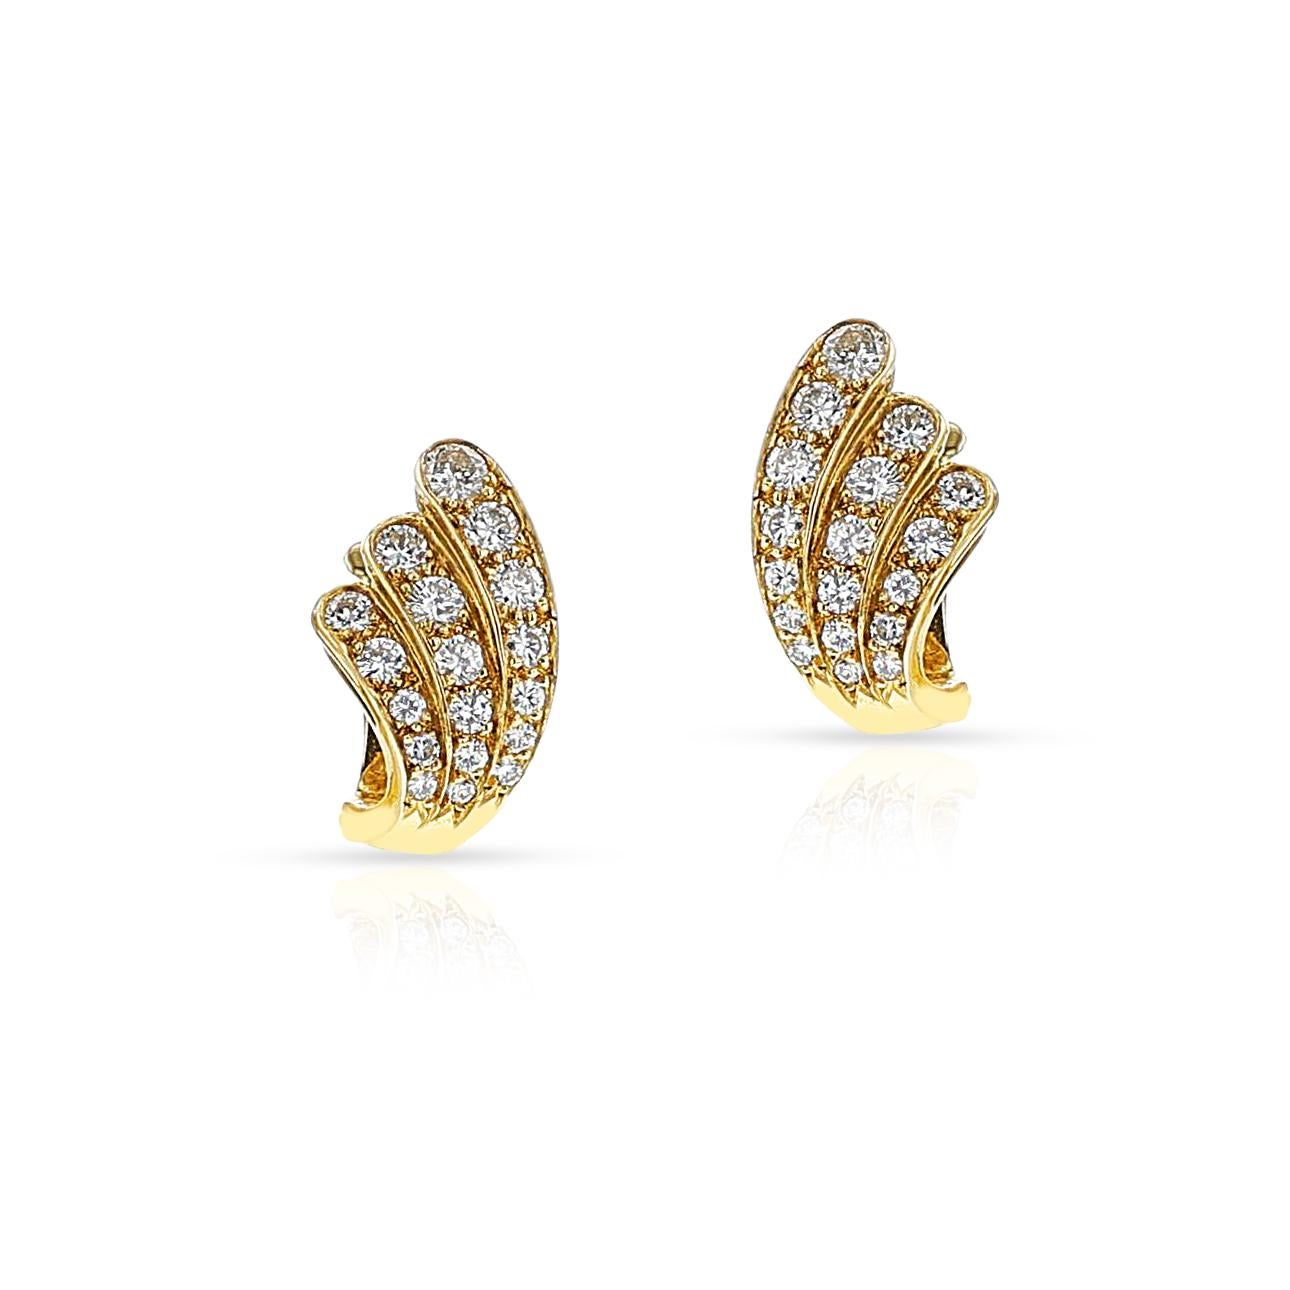 A pair of Van Cleef & Arpels Three Arch Earrings made in 18k Yellow Gold. Signed and numbered. The total weight of the earring is 6.56 grams, measuring 0.68 x 0.41 inches.



SKU: 1526